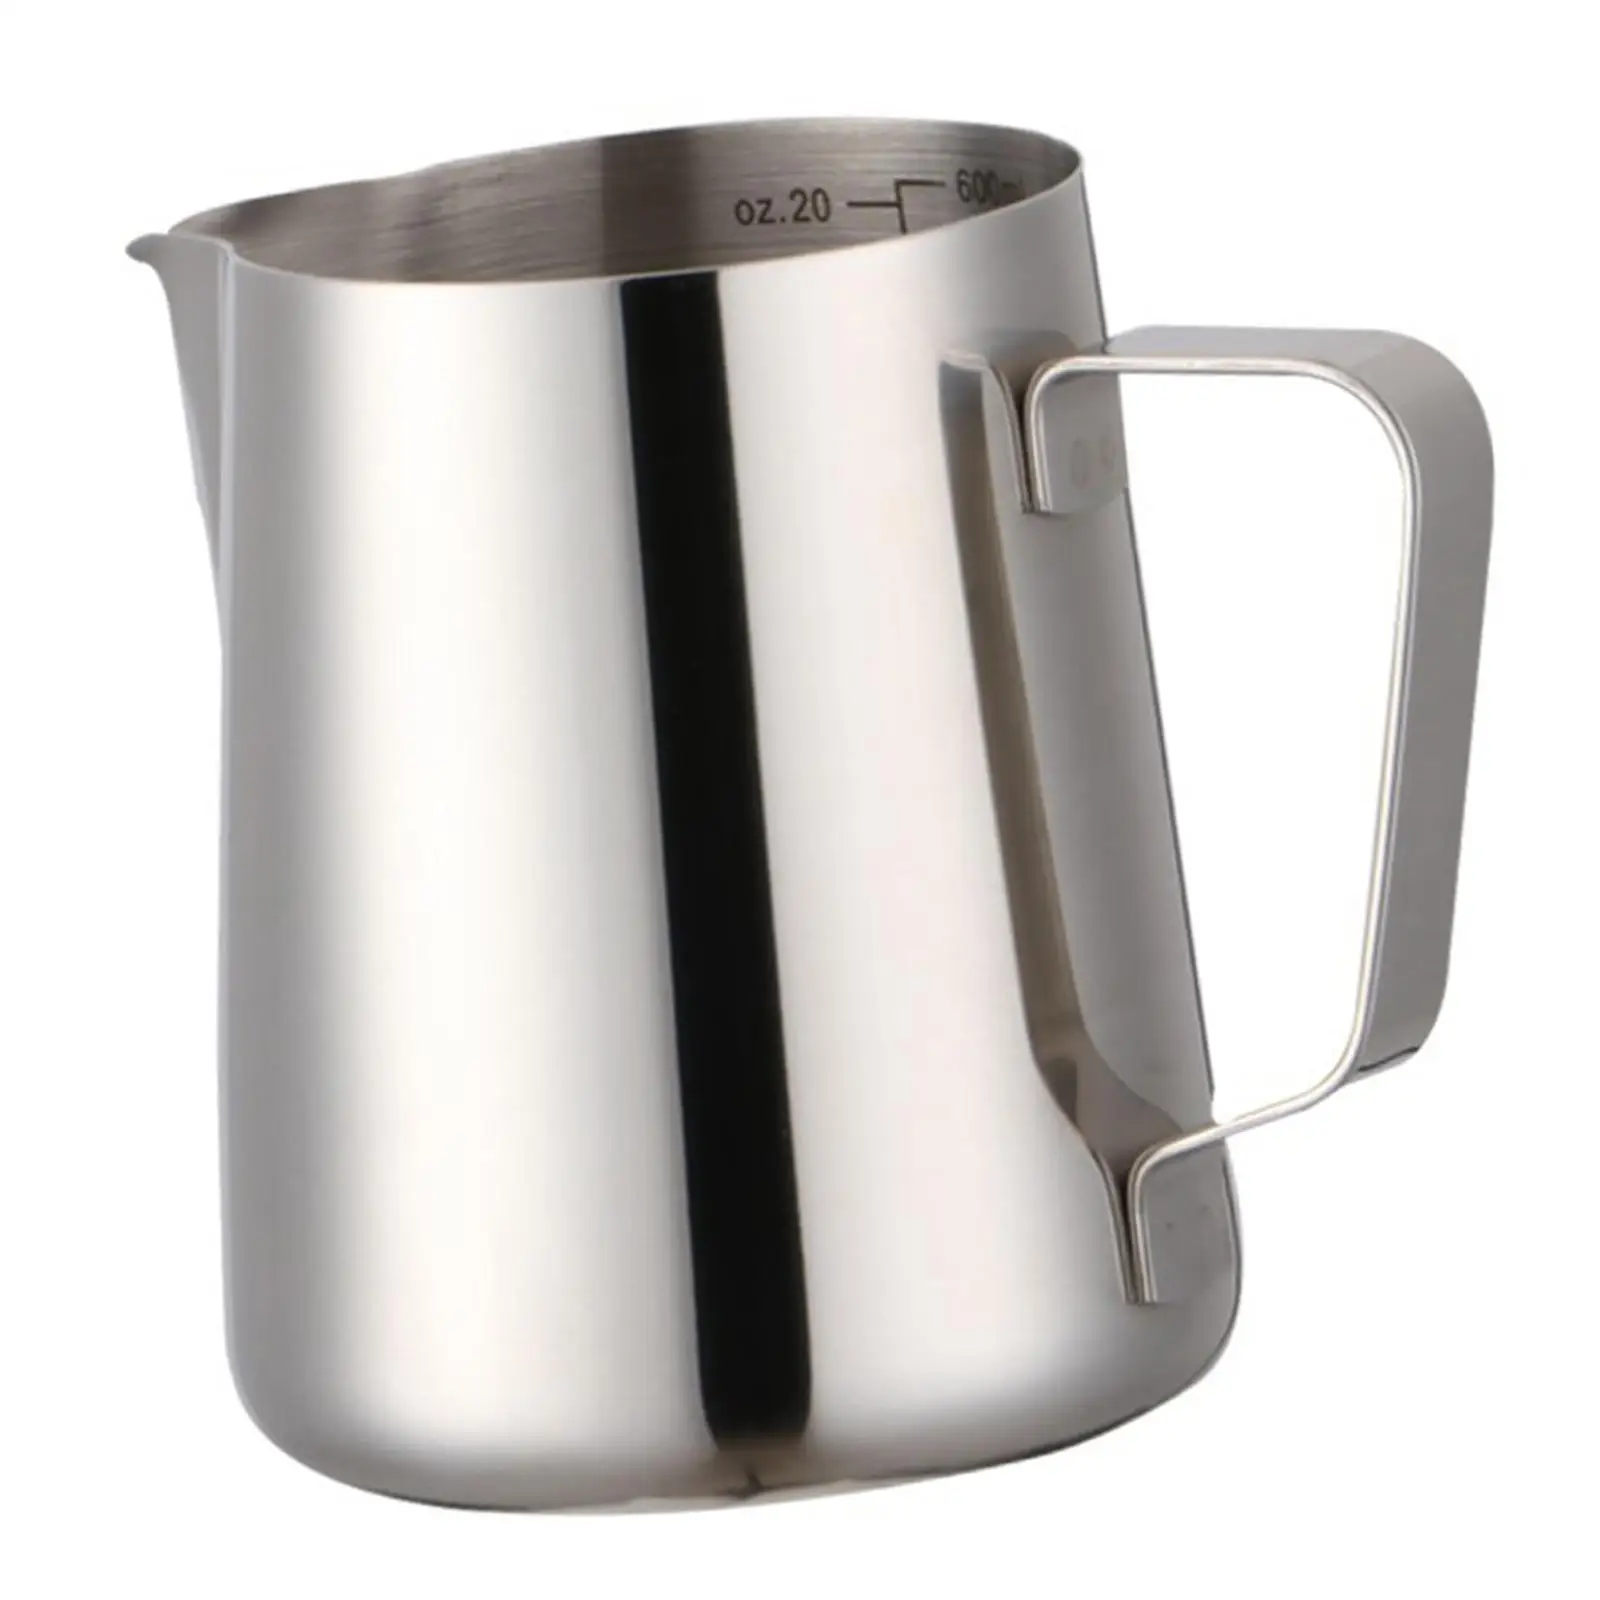 600ml Milk Frothing Pitcher Milk Frother cup Jug Cup Espresso Machine Accessories Espresso Steaming Pitcher for coffee